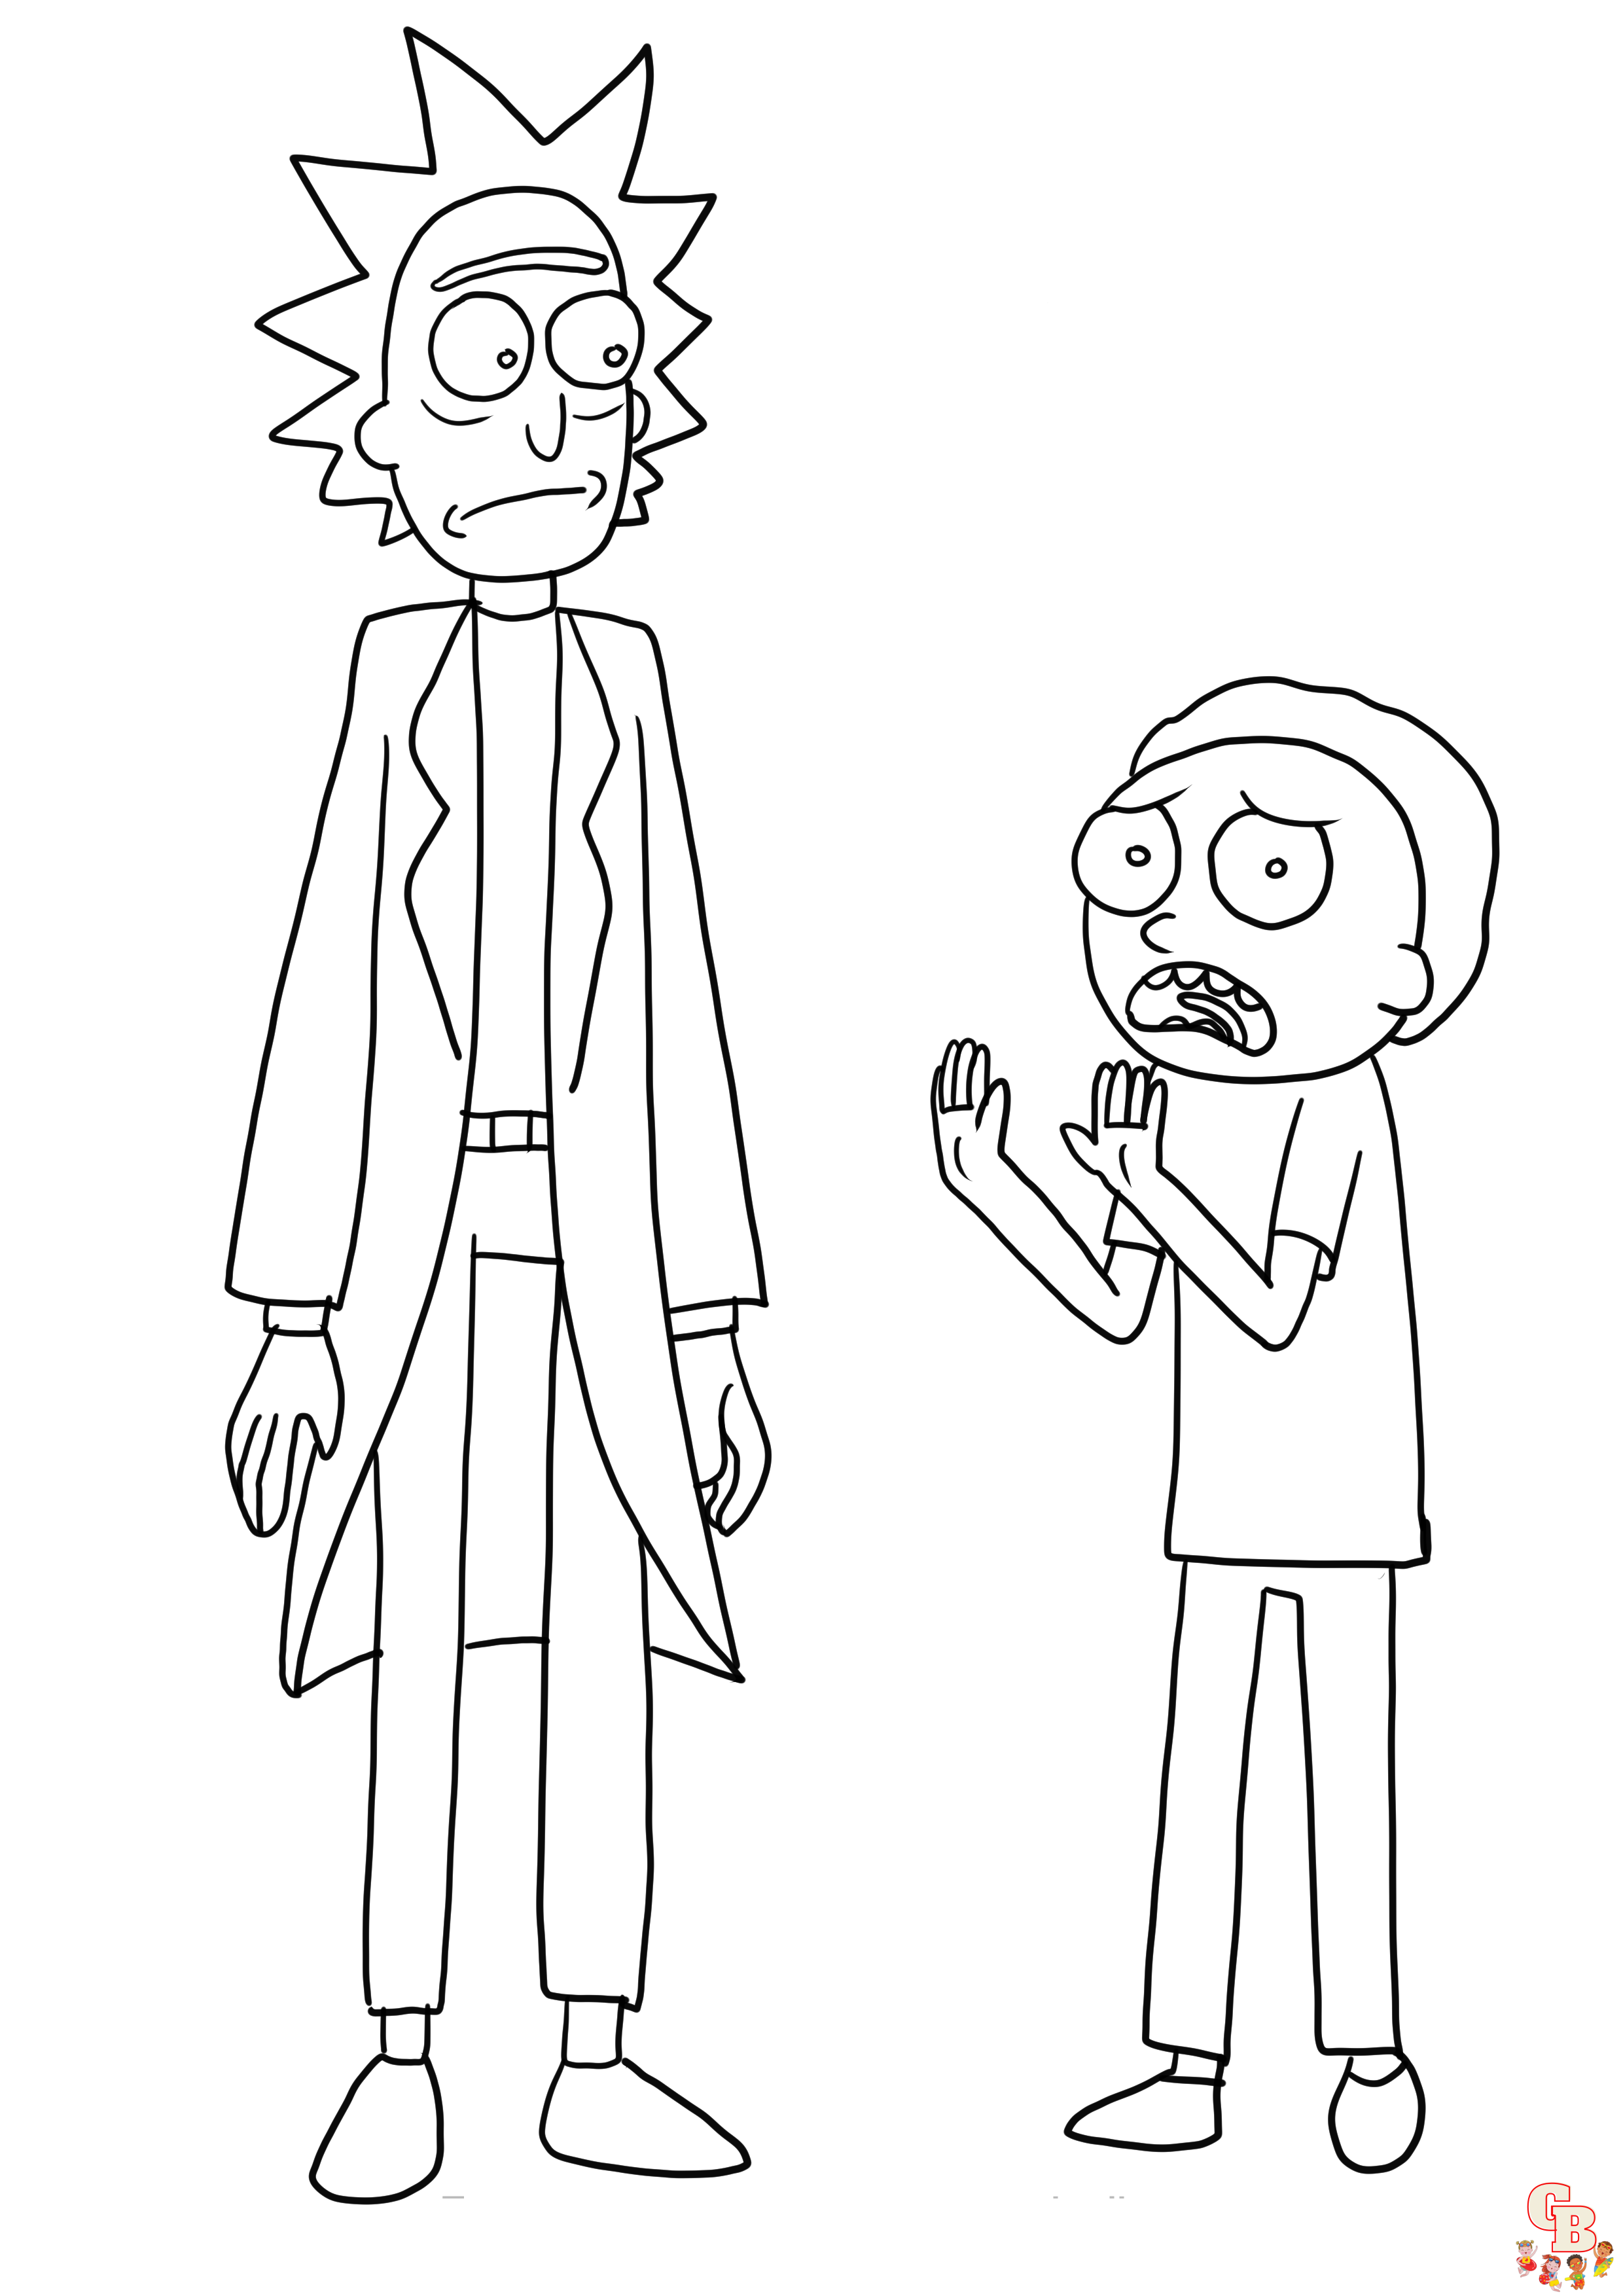 Rick and Morty Coloring Pages 3